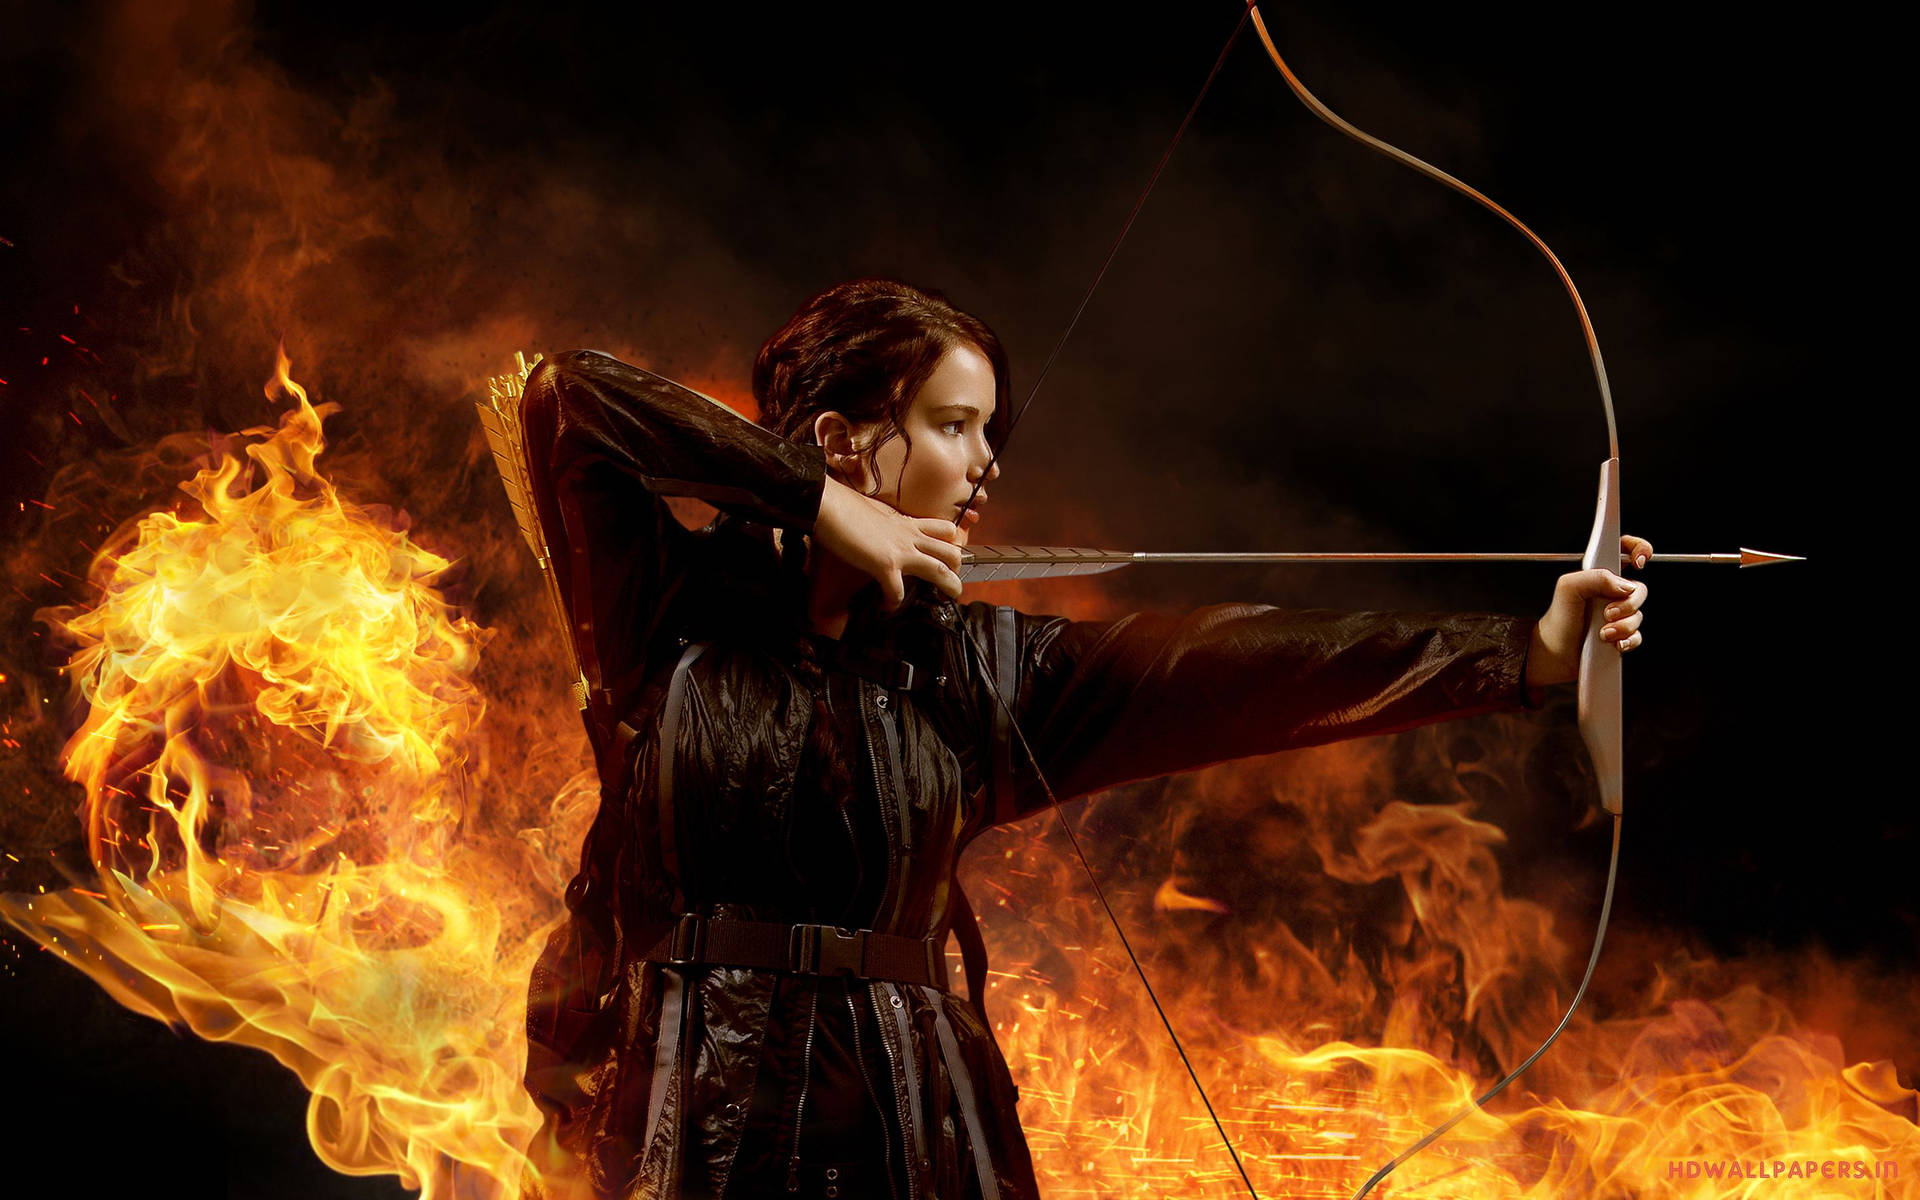 Katniss Everdeen From The Hunger Games Series Aiming With Bow Background